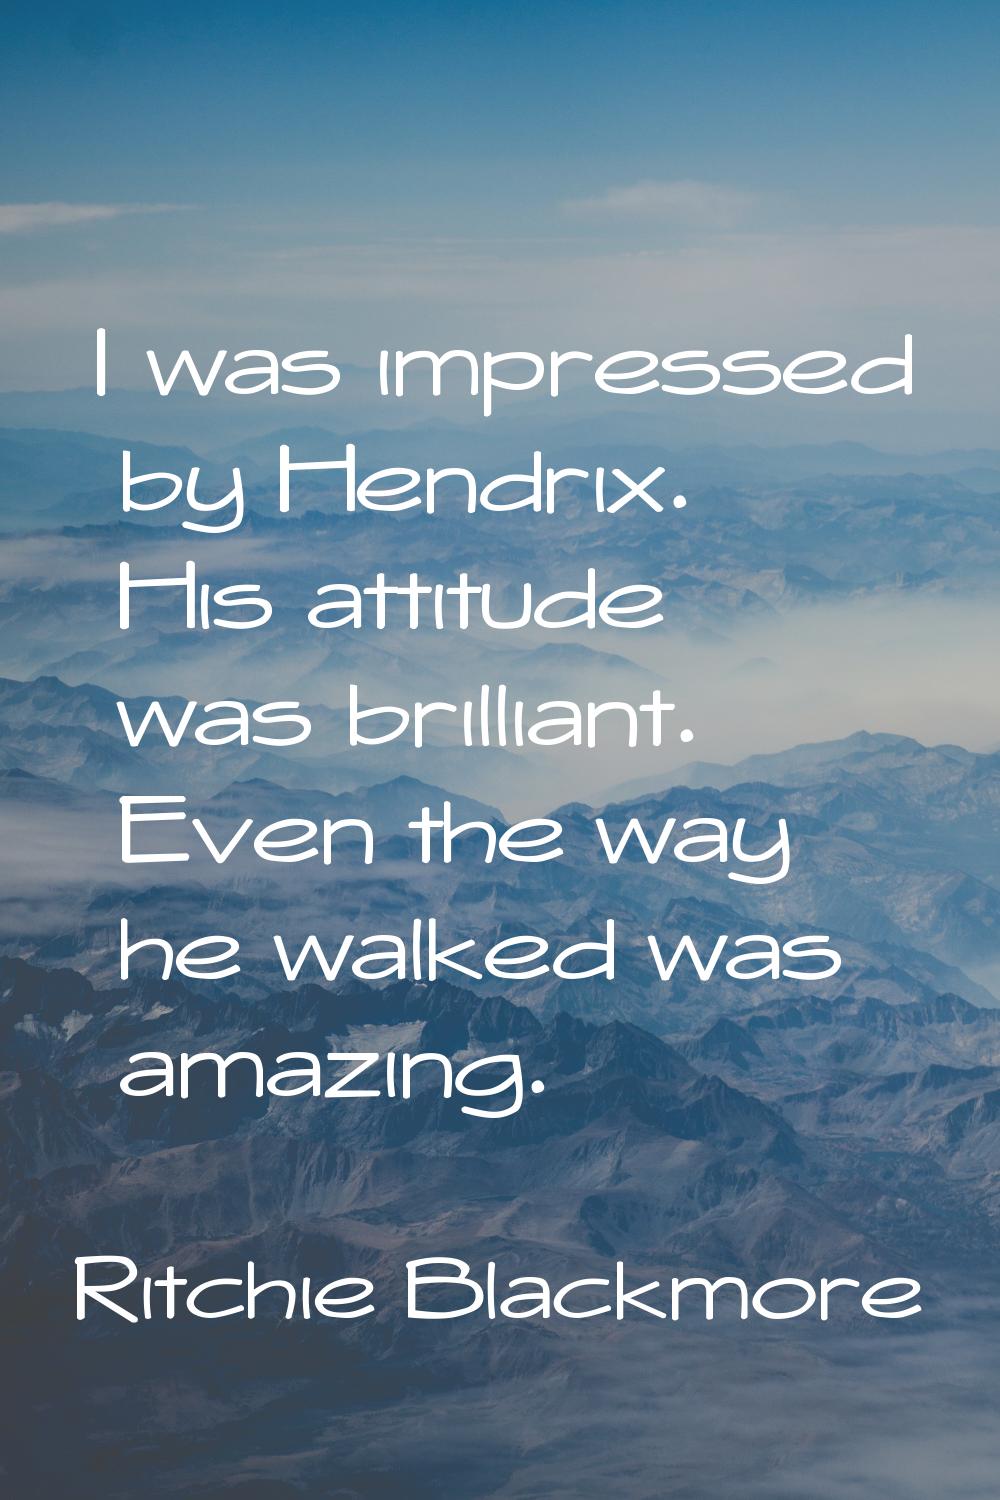 I was impressed by Hendrix. His attitude was brilliant. Even the way he walked was amazing.